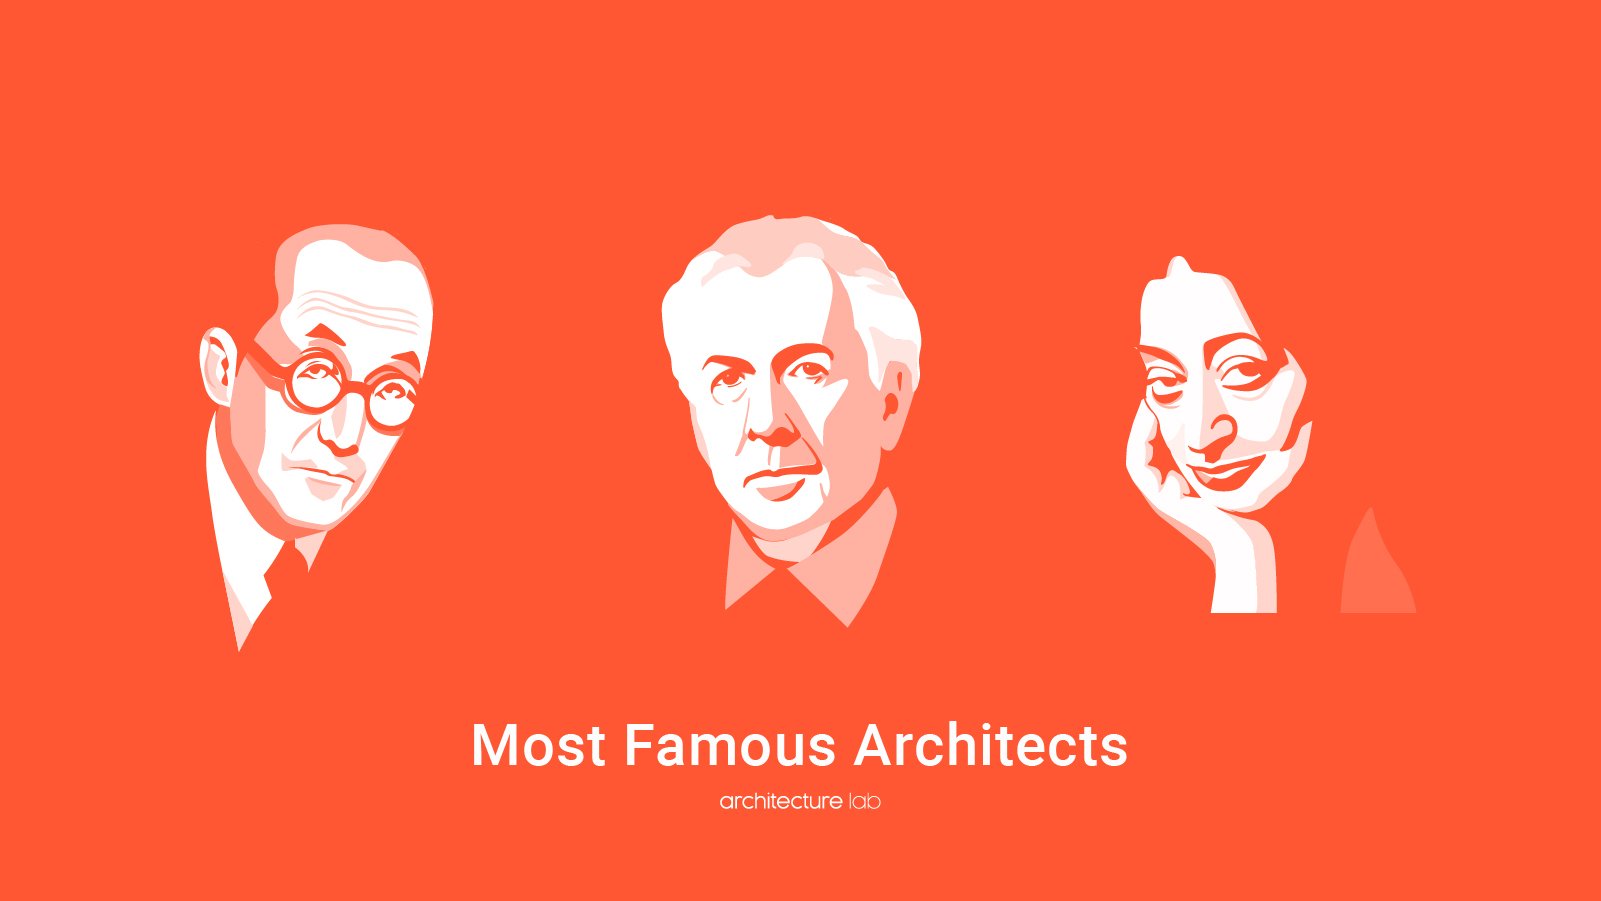 49 most famous architects in modern history